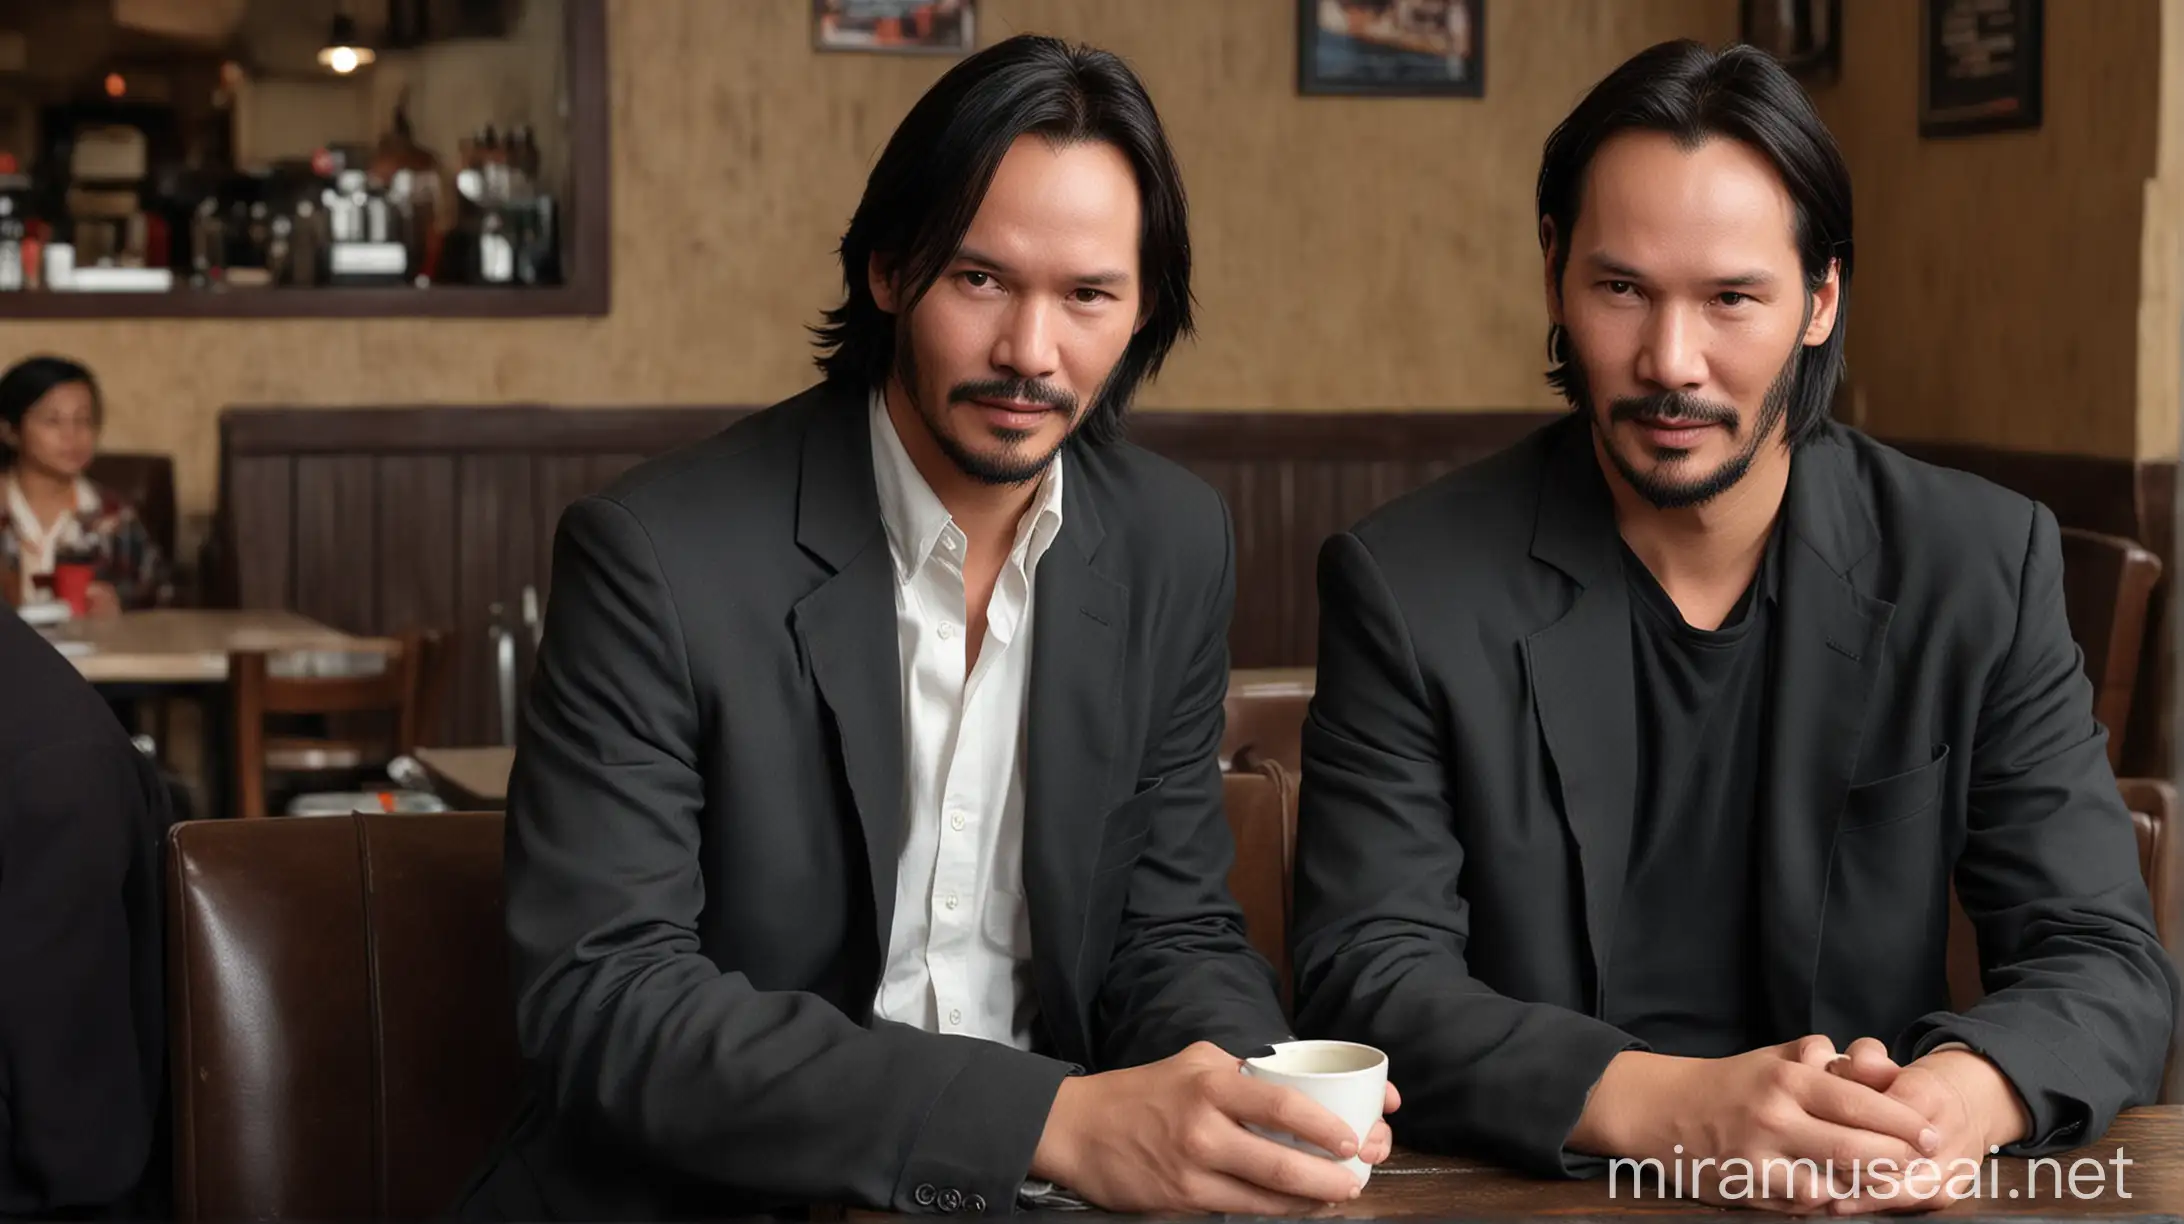 An Indonesian young man aged around 32 years was sitting together wearing a blazer in a coffee shop while drinking coffee with Keanu Reeves.